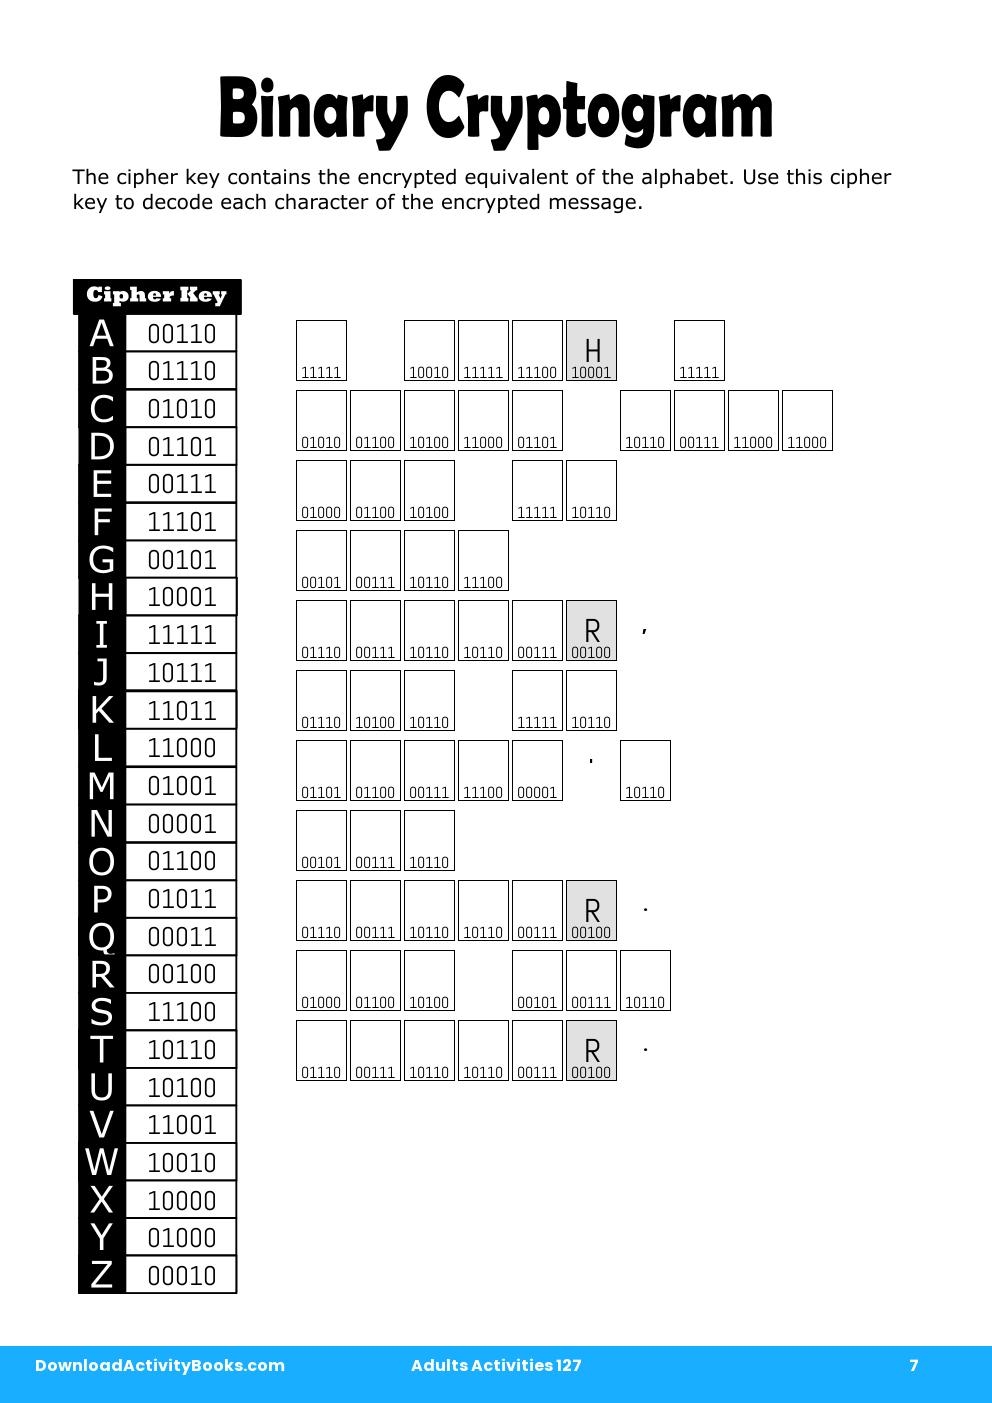 Binary Cryptogram in Adults Activities 127